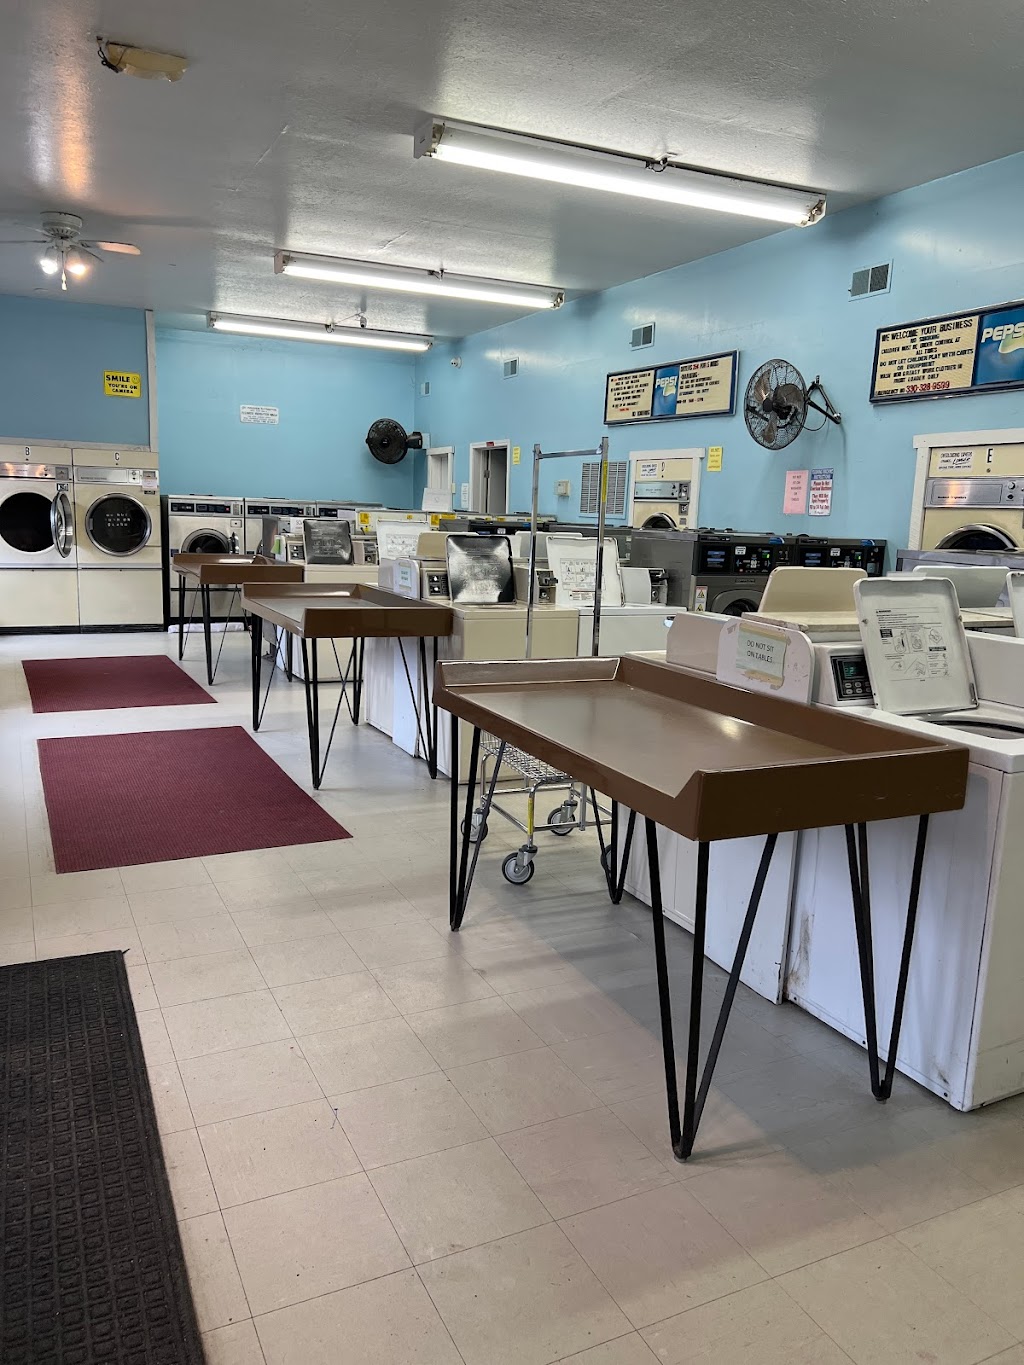 The Wash Tub | 3585 State Rd, Cuyahoga Falls, OH 44223, USA | Phone: (330) 328-9599